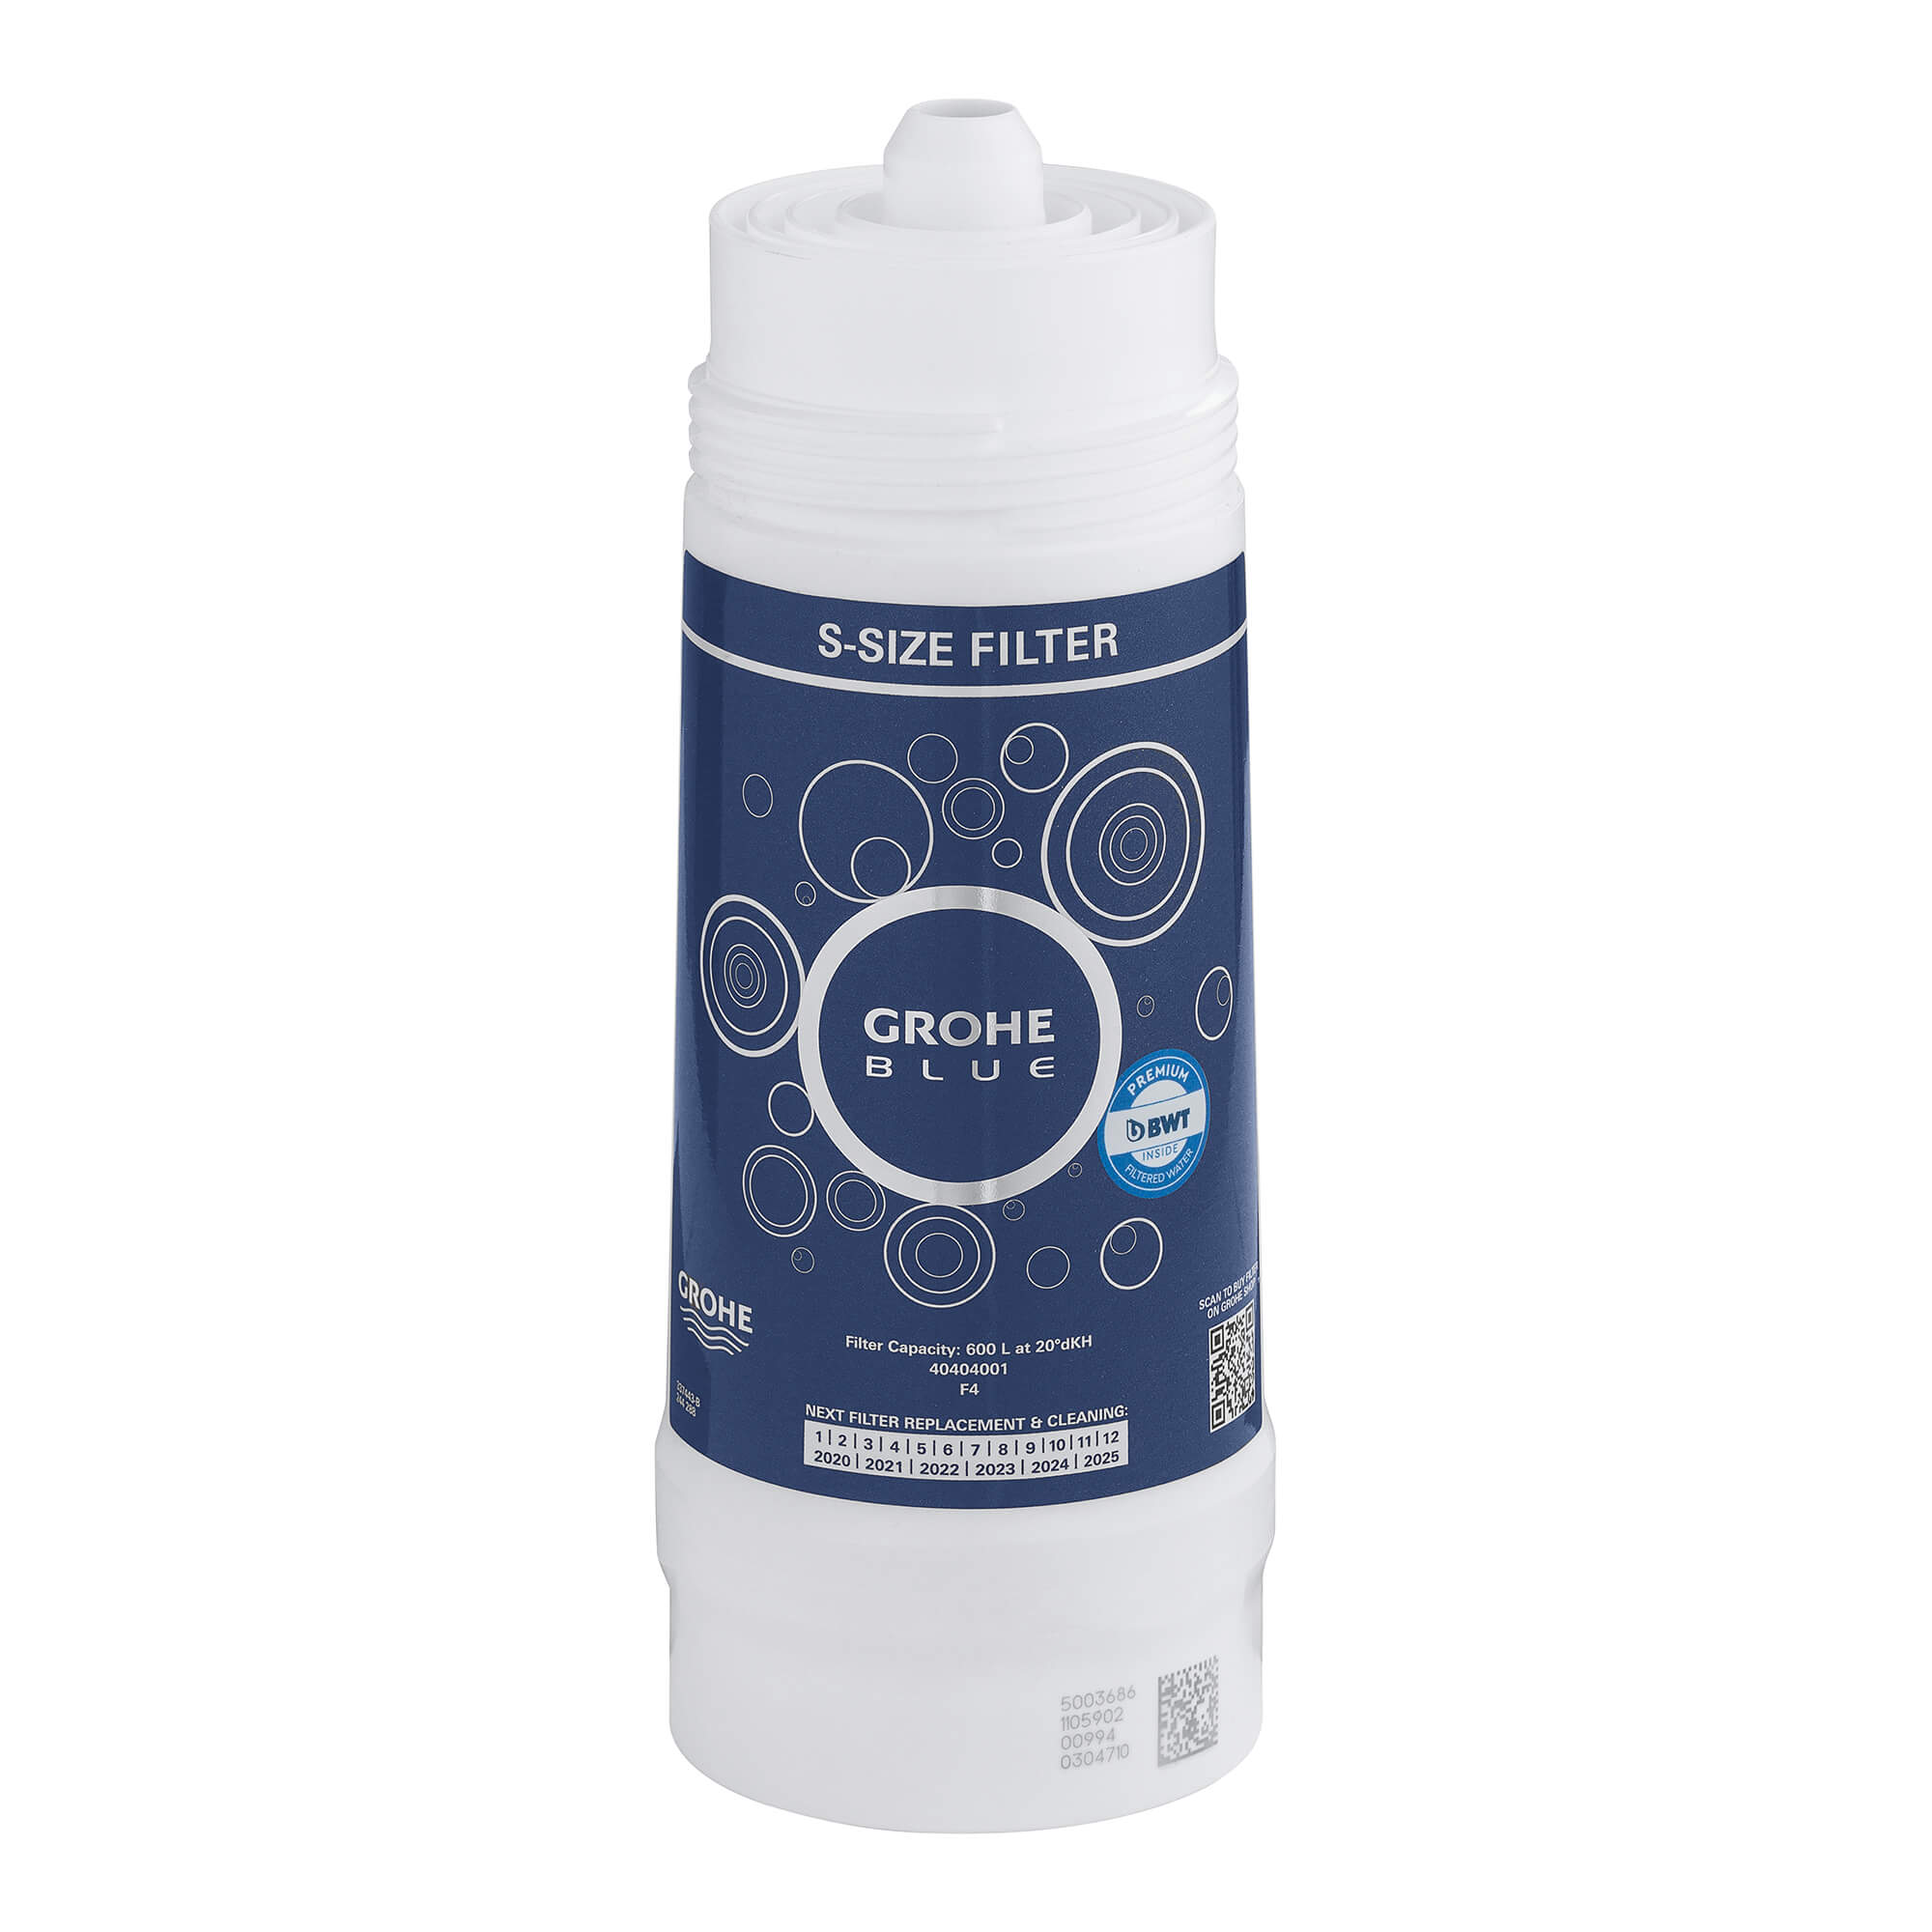 Grohe Blue Filter Carbon Filter For Regular Water Hardness